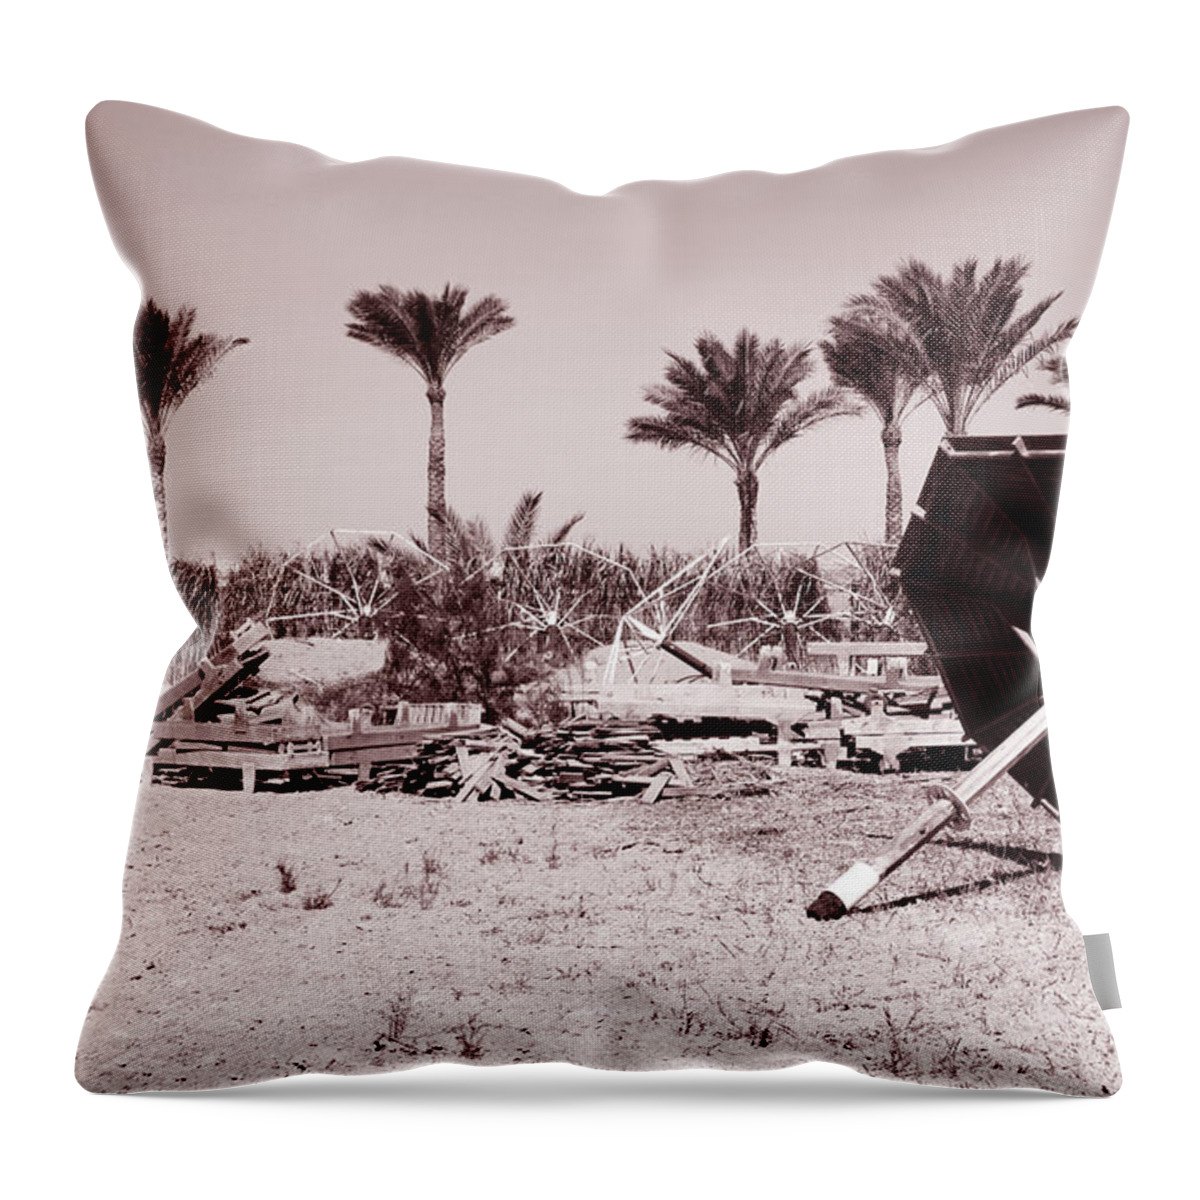 Horses 1 Throw Pillow featuring the photograph It's All A Turmoil by Jez C Self